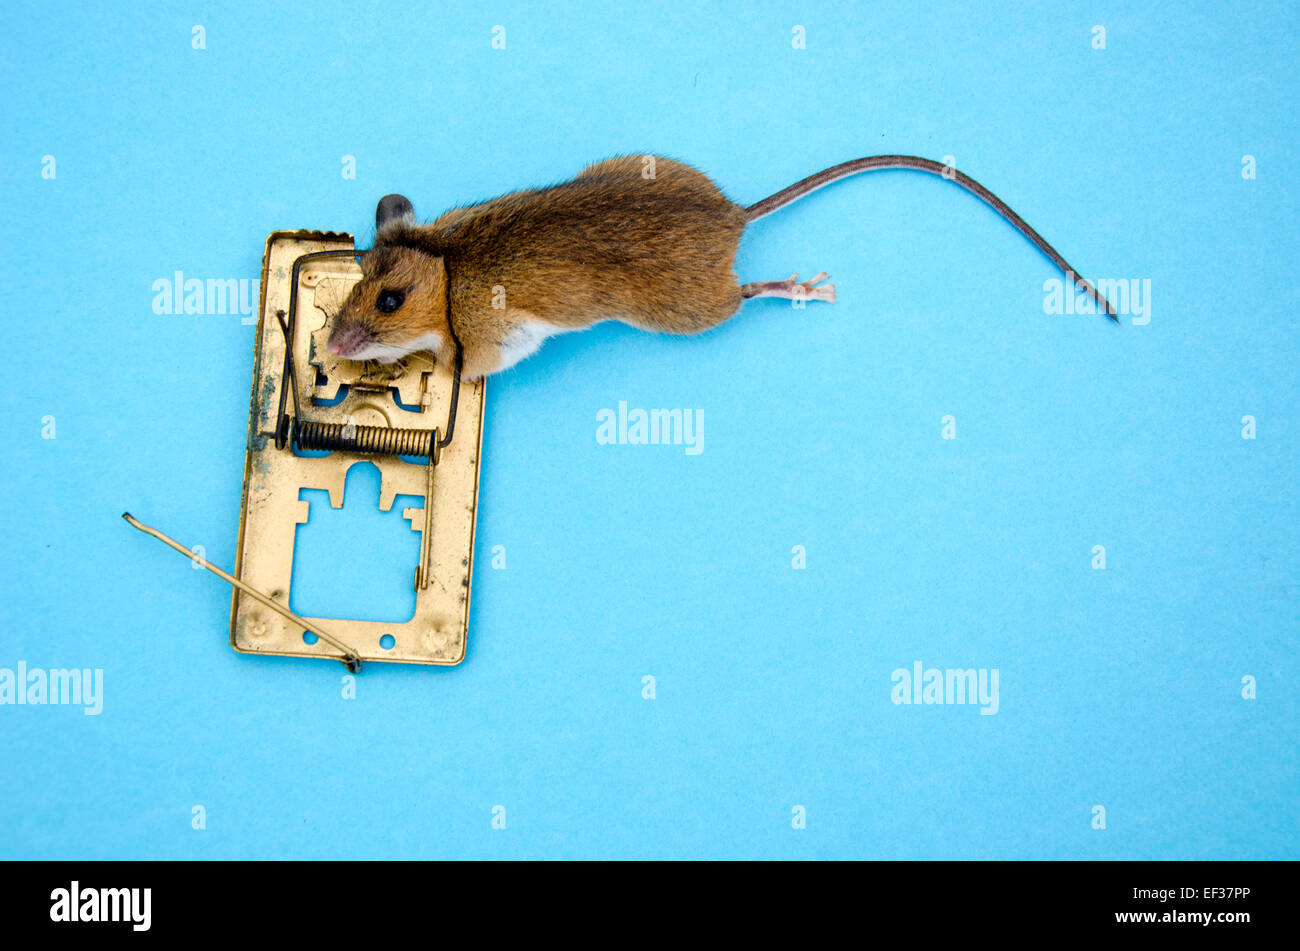 https://c8.alamy.com/comp/EF37PP/dead-animal-pest-mouse-apodemus-flavicolis-yellow-necked-mouse-in-EF37PP.jpg